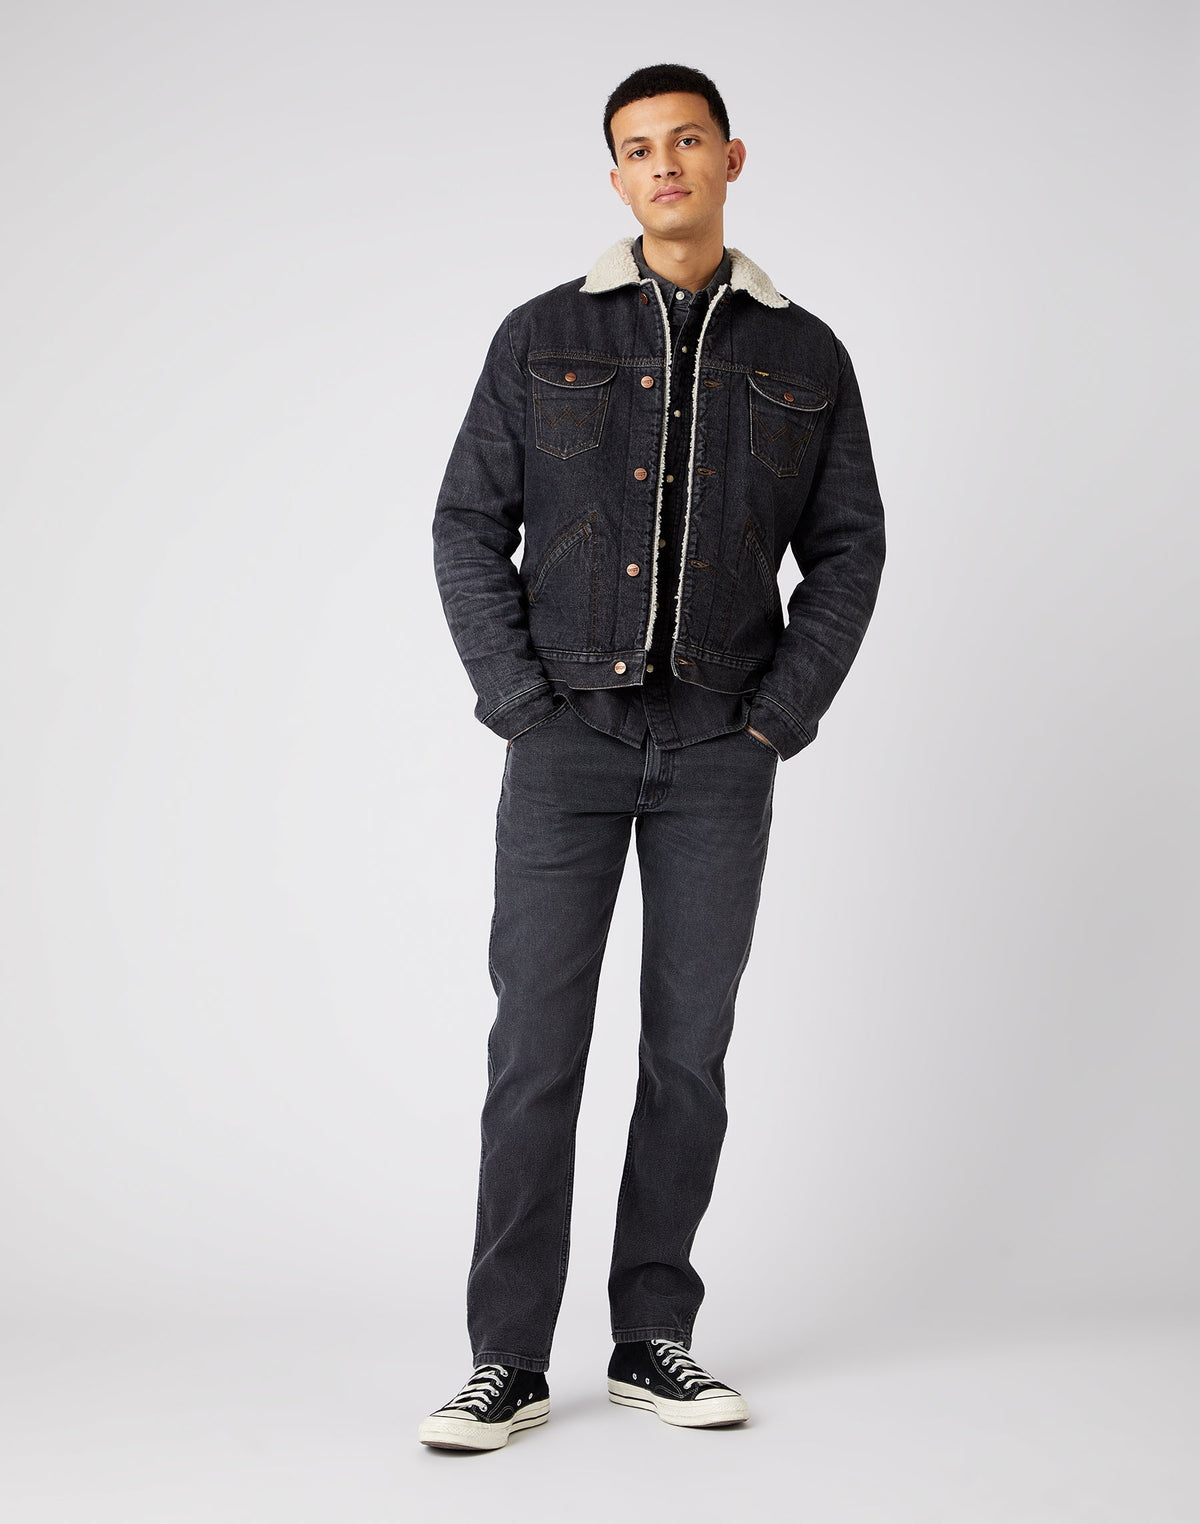 Indigood Icons 11MWZ Western Slim Jeans in Black Ace